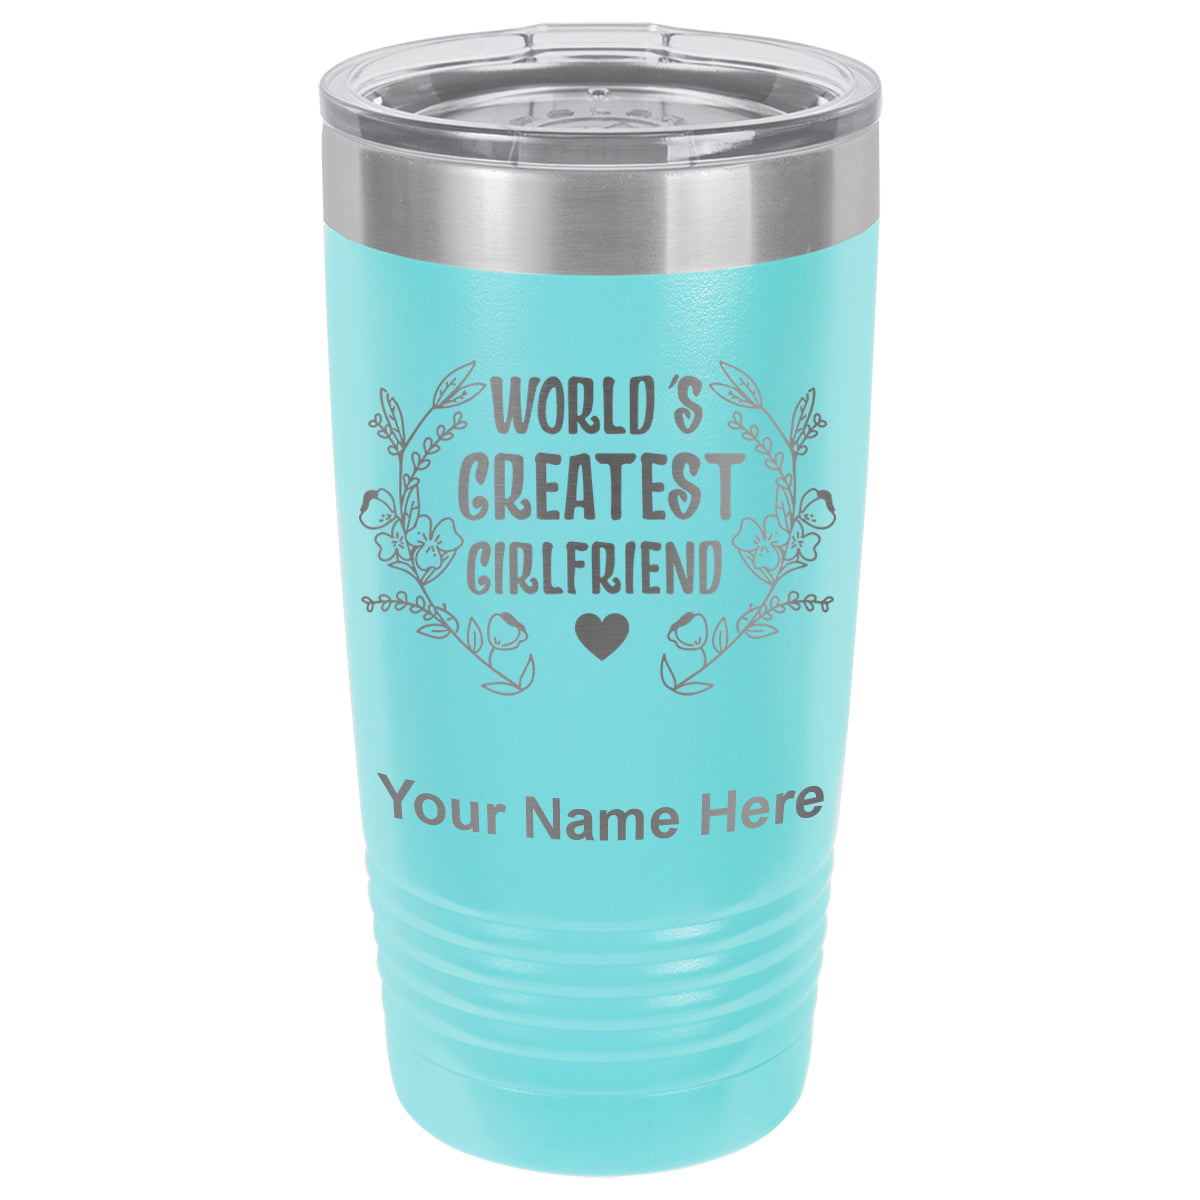 20oz Vacuum Insulated Tumbler Mug, World's Greatest Girlfriend, Personalized Engraving Included